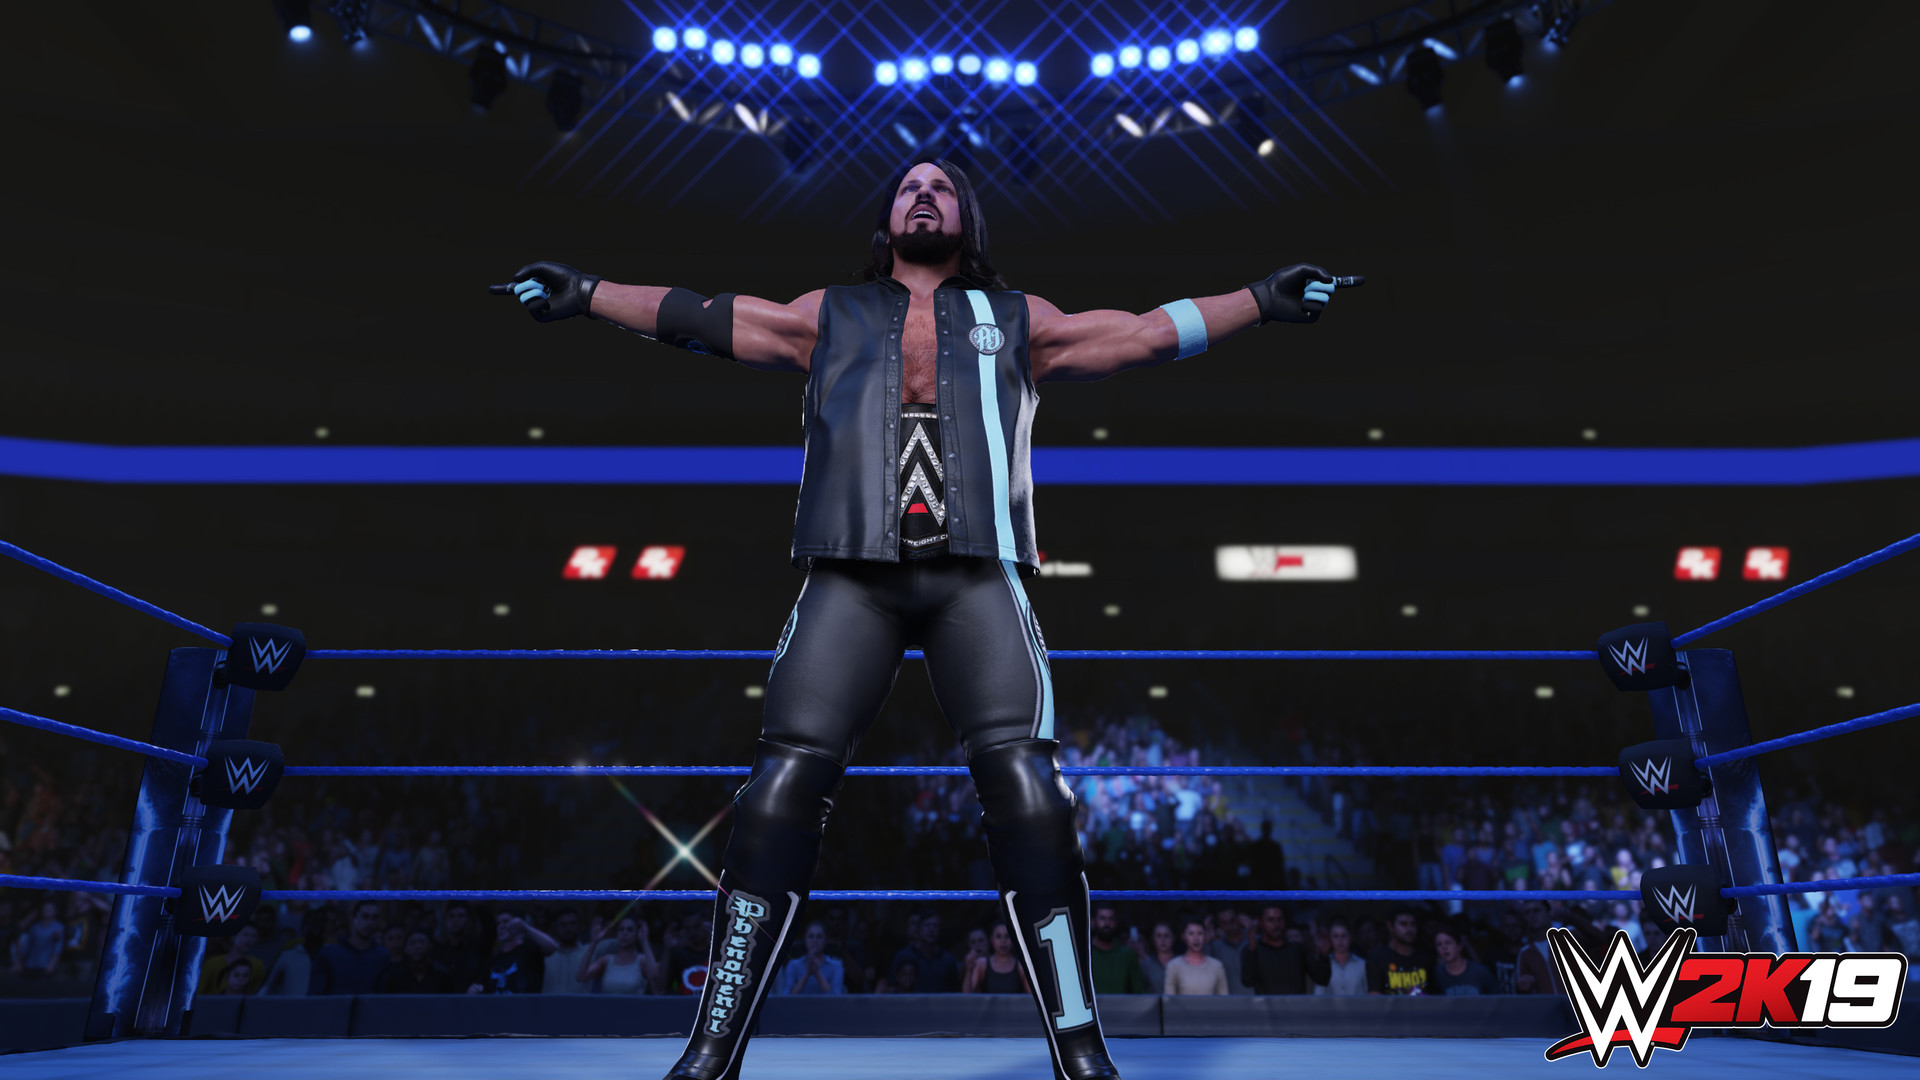 Breaking down the current state of wrestling video games